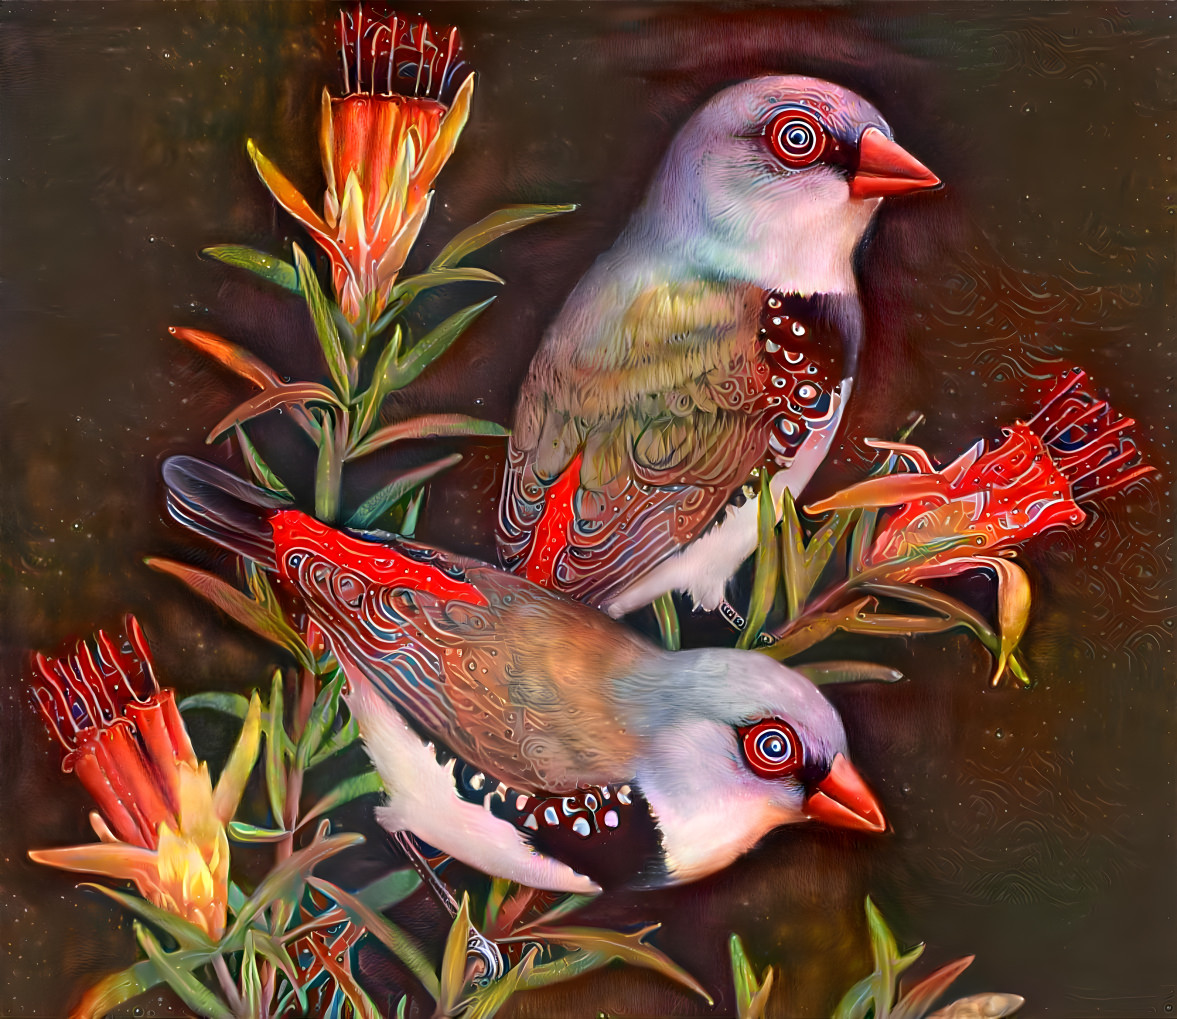 Firetail finches on flowers